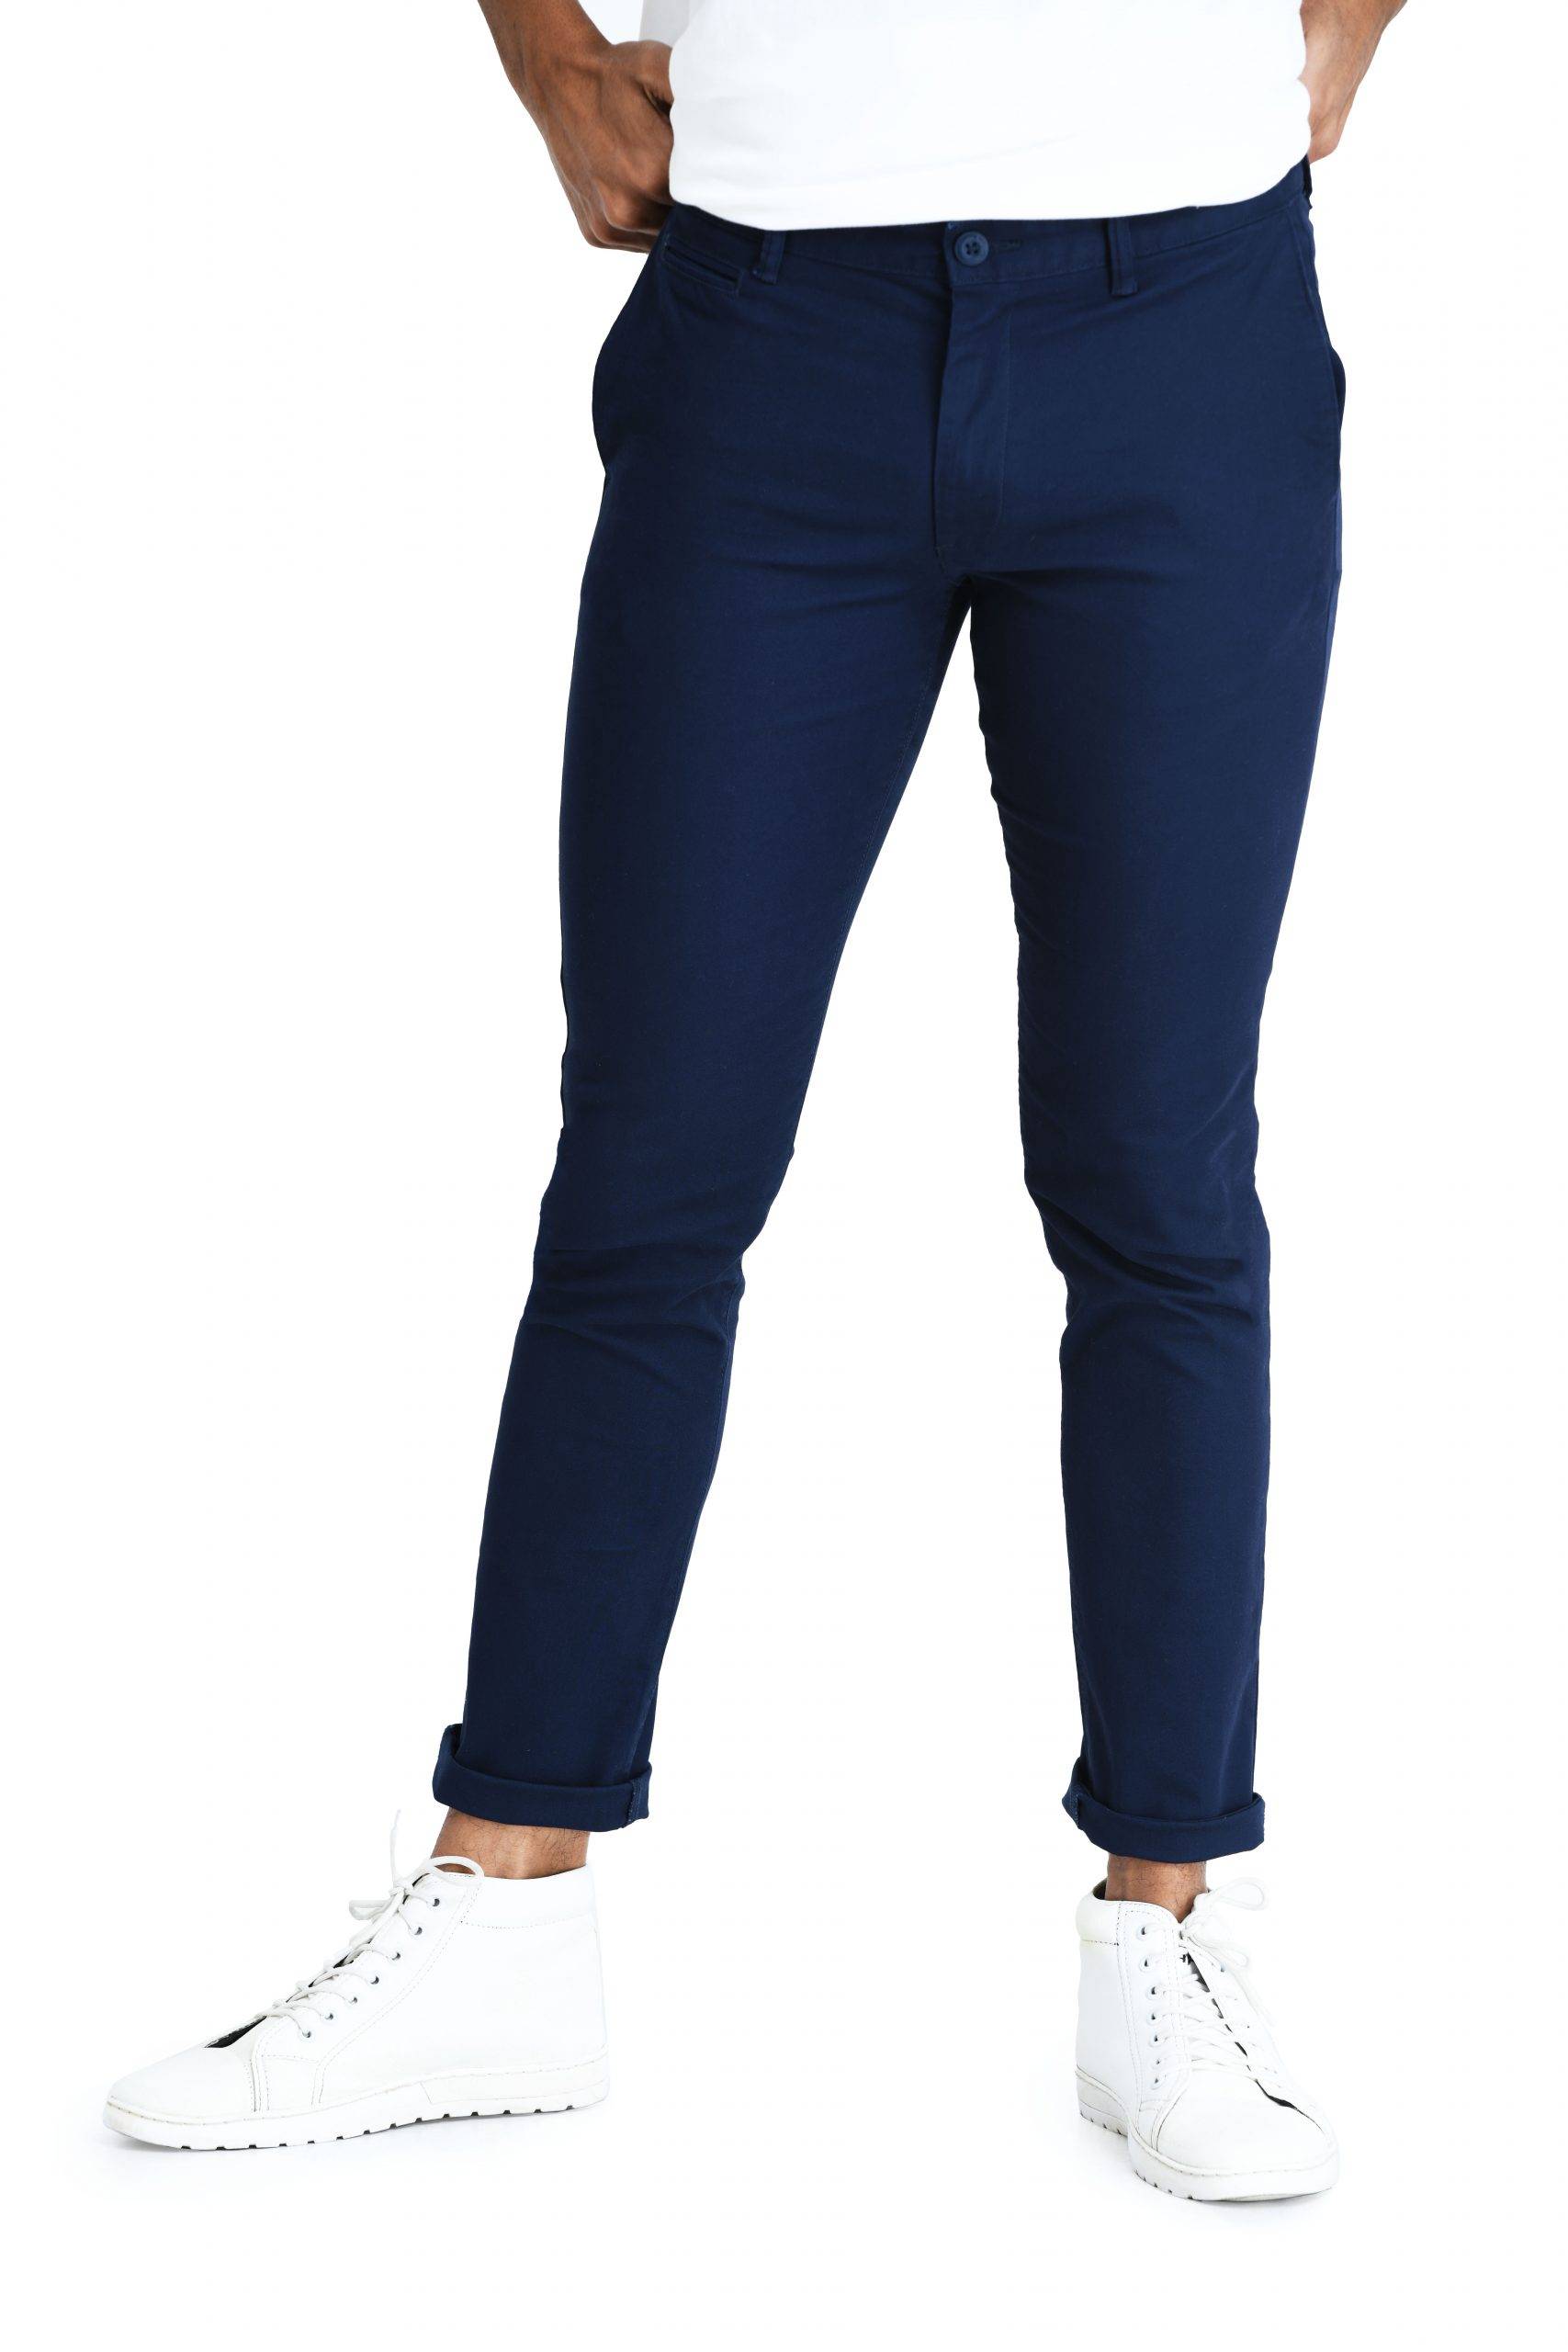 Navy Blue Chinos - Shop for Navy Blue Chinos Online | Myntra